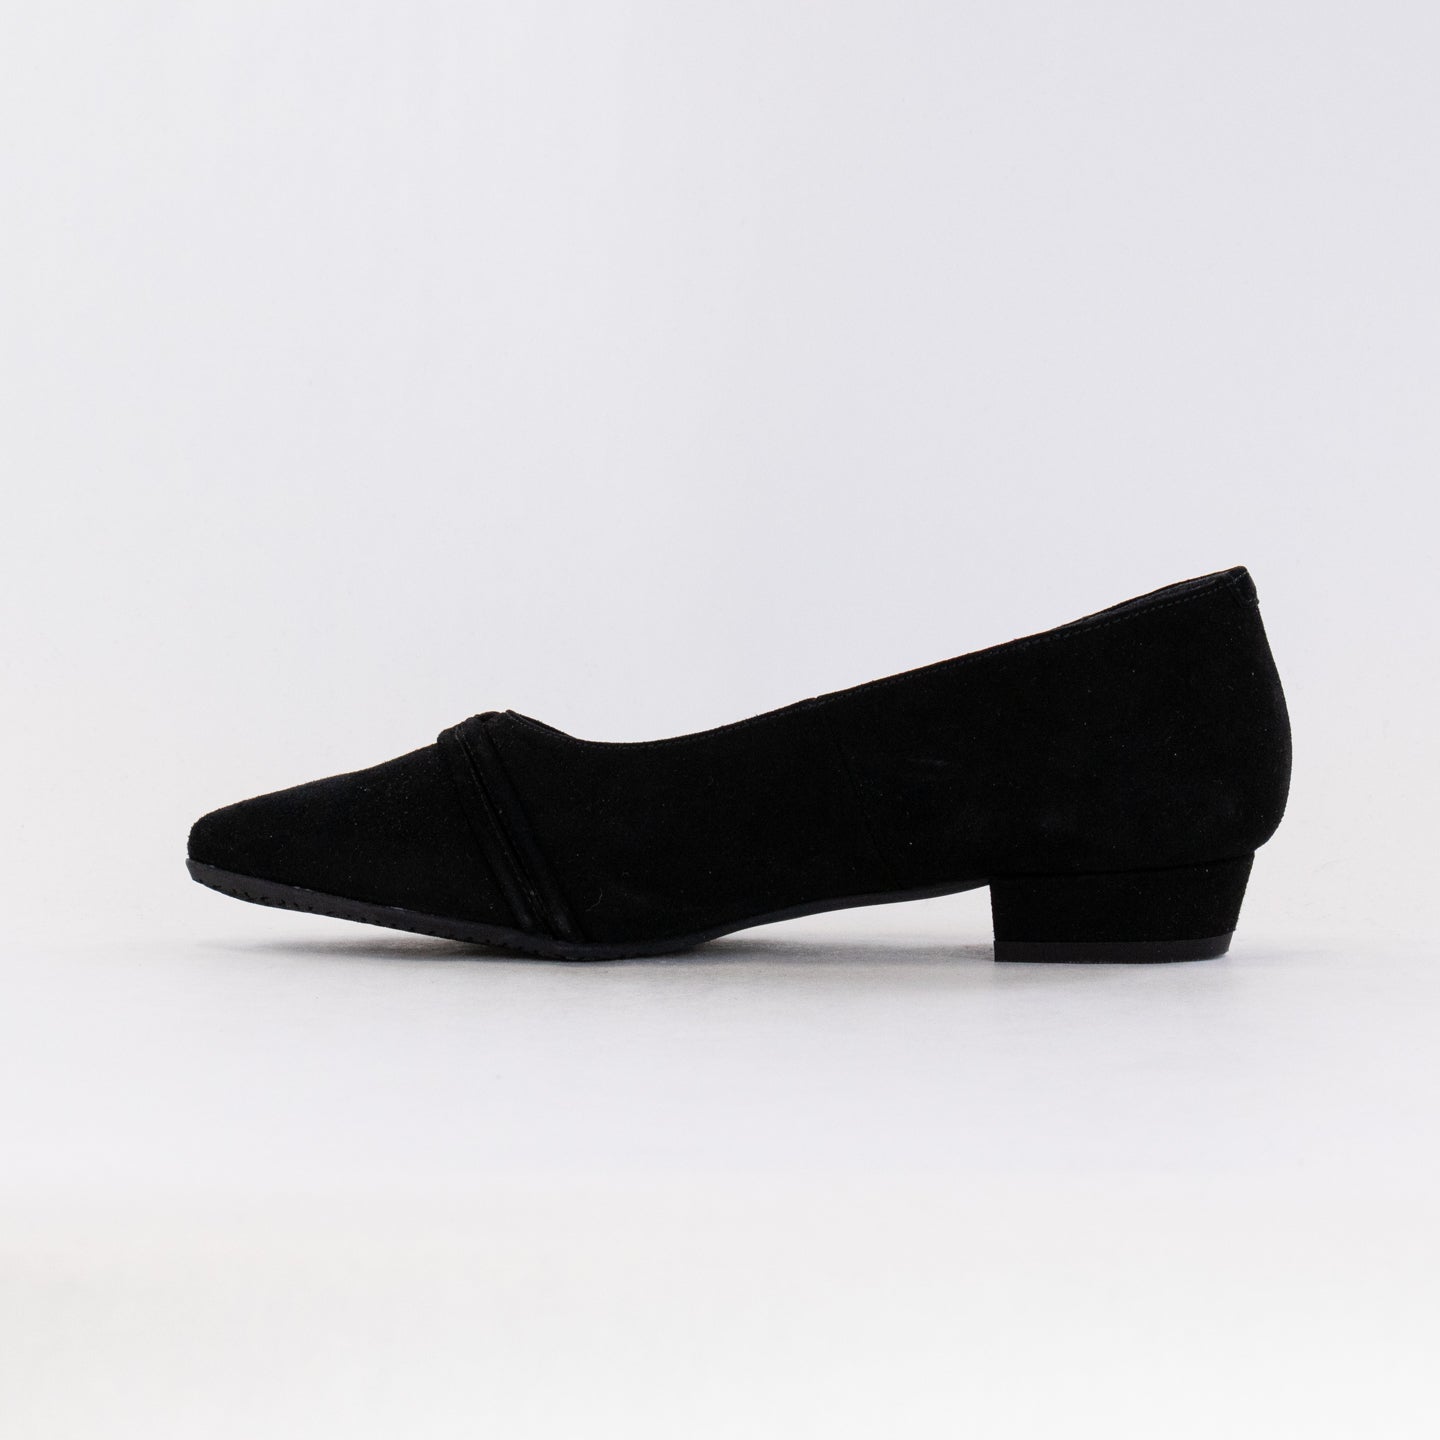 Eric Michael Kim Loafer (Women's) - Black Suede